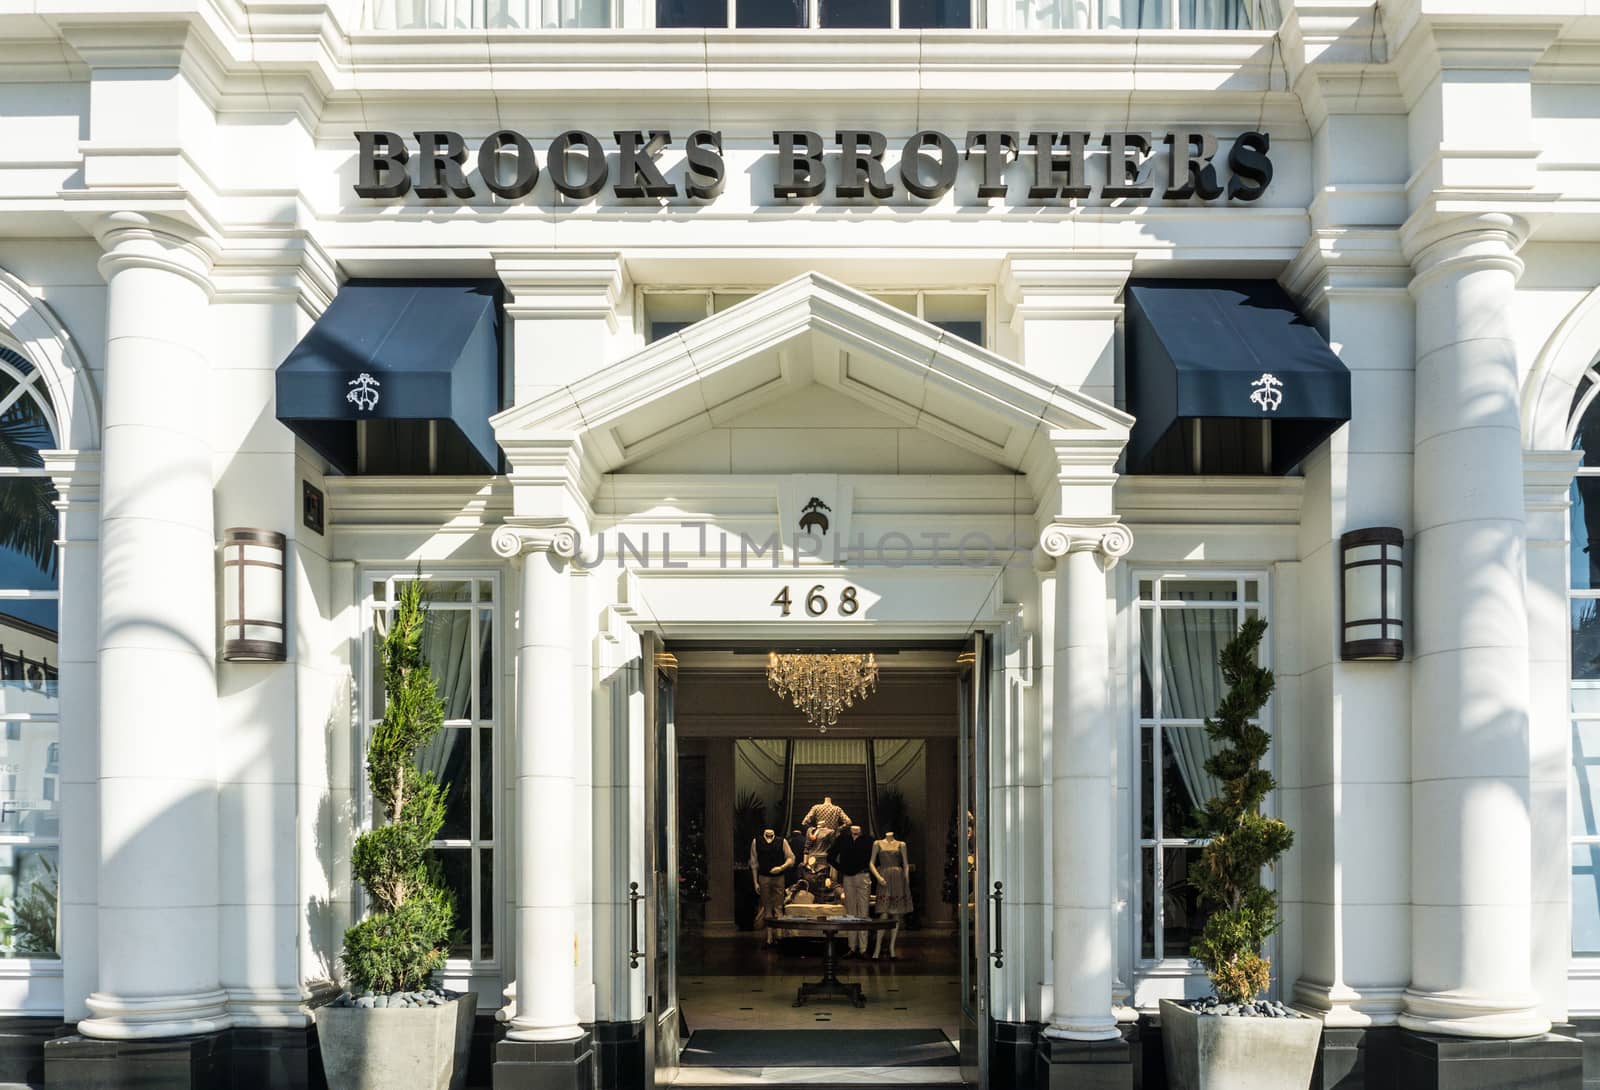 Brook's Brothers Retail Store Exterior by wolterk